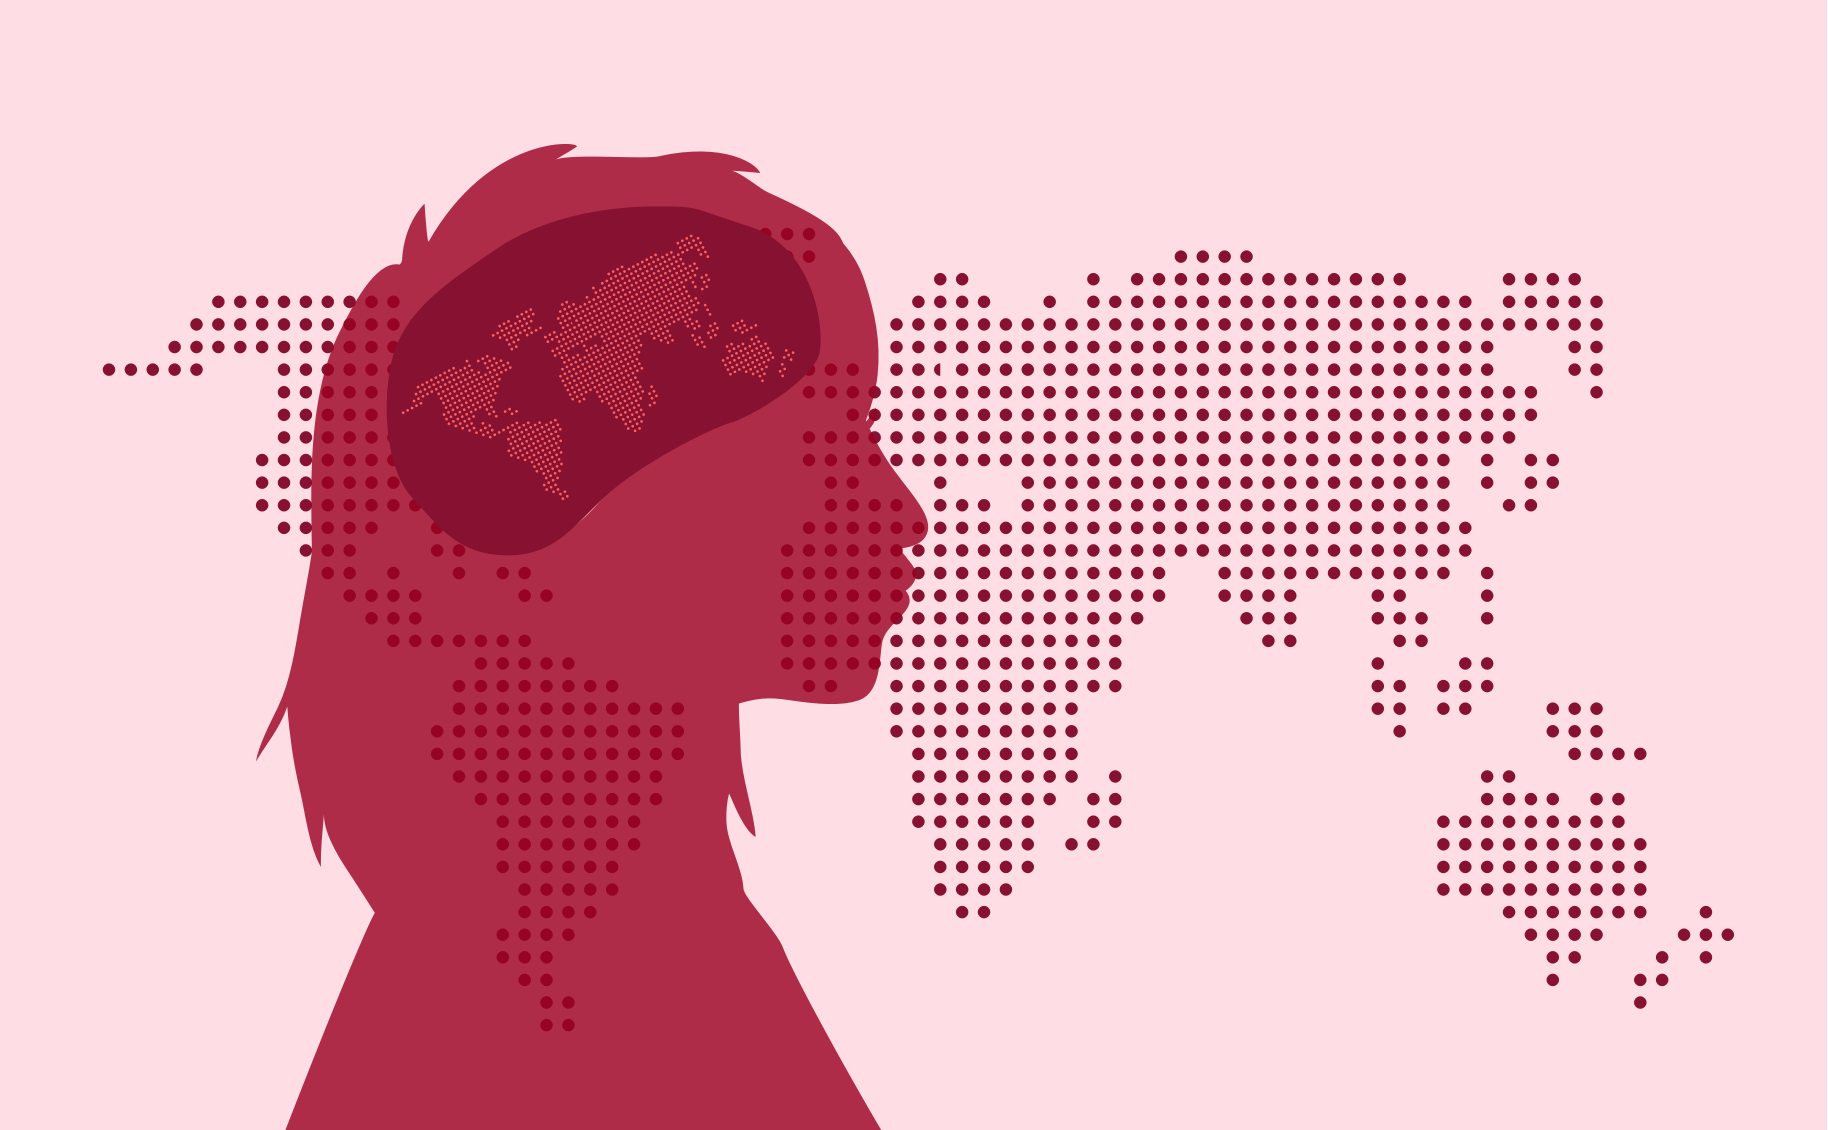 Illustration: profile of person with pixelated world map superimposed on brain area. Pixelated world map in background.